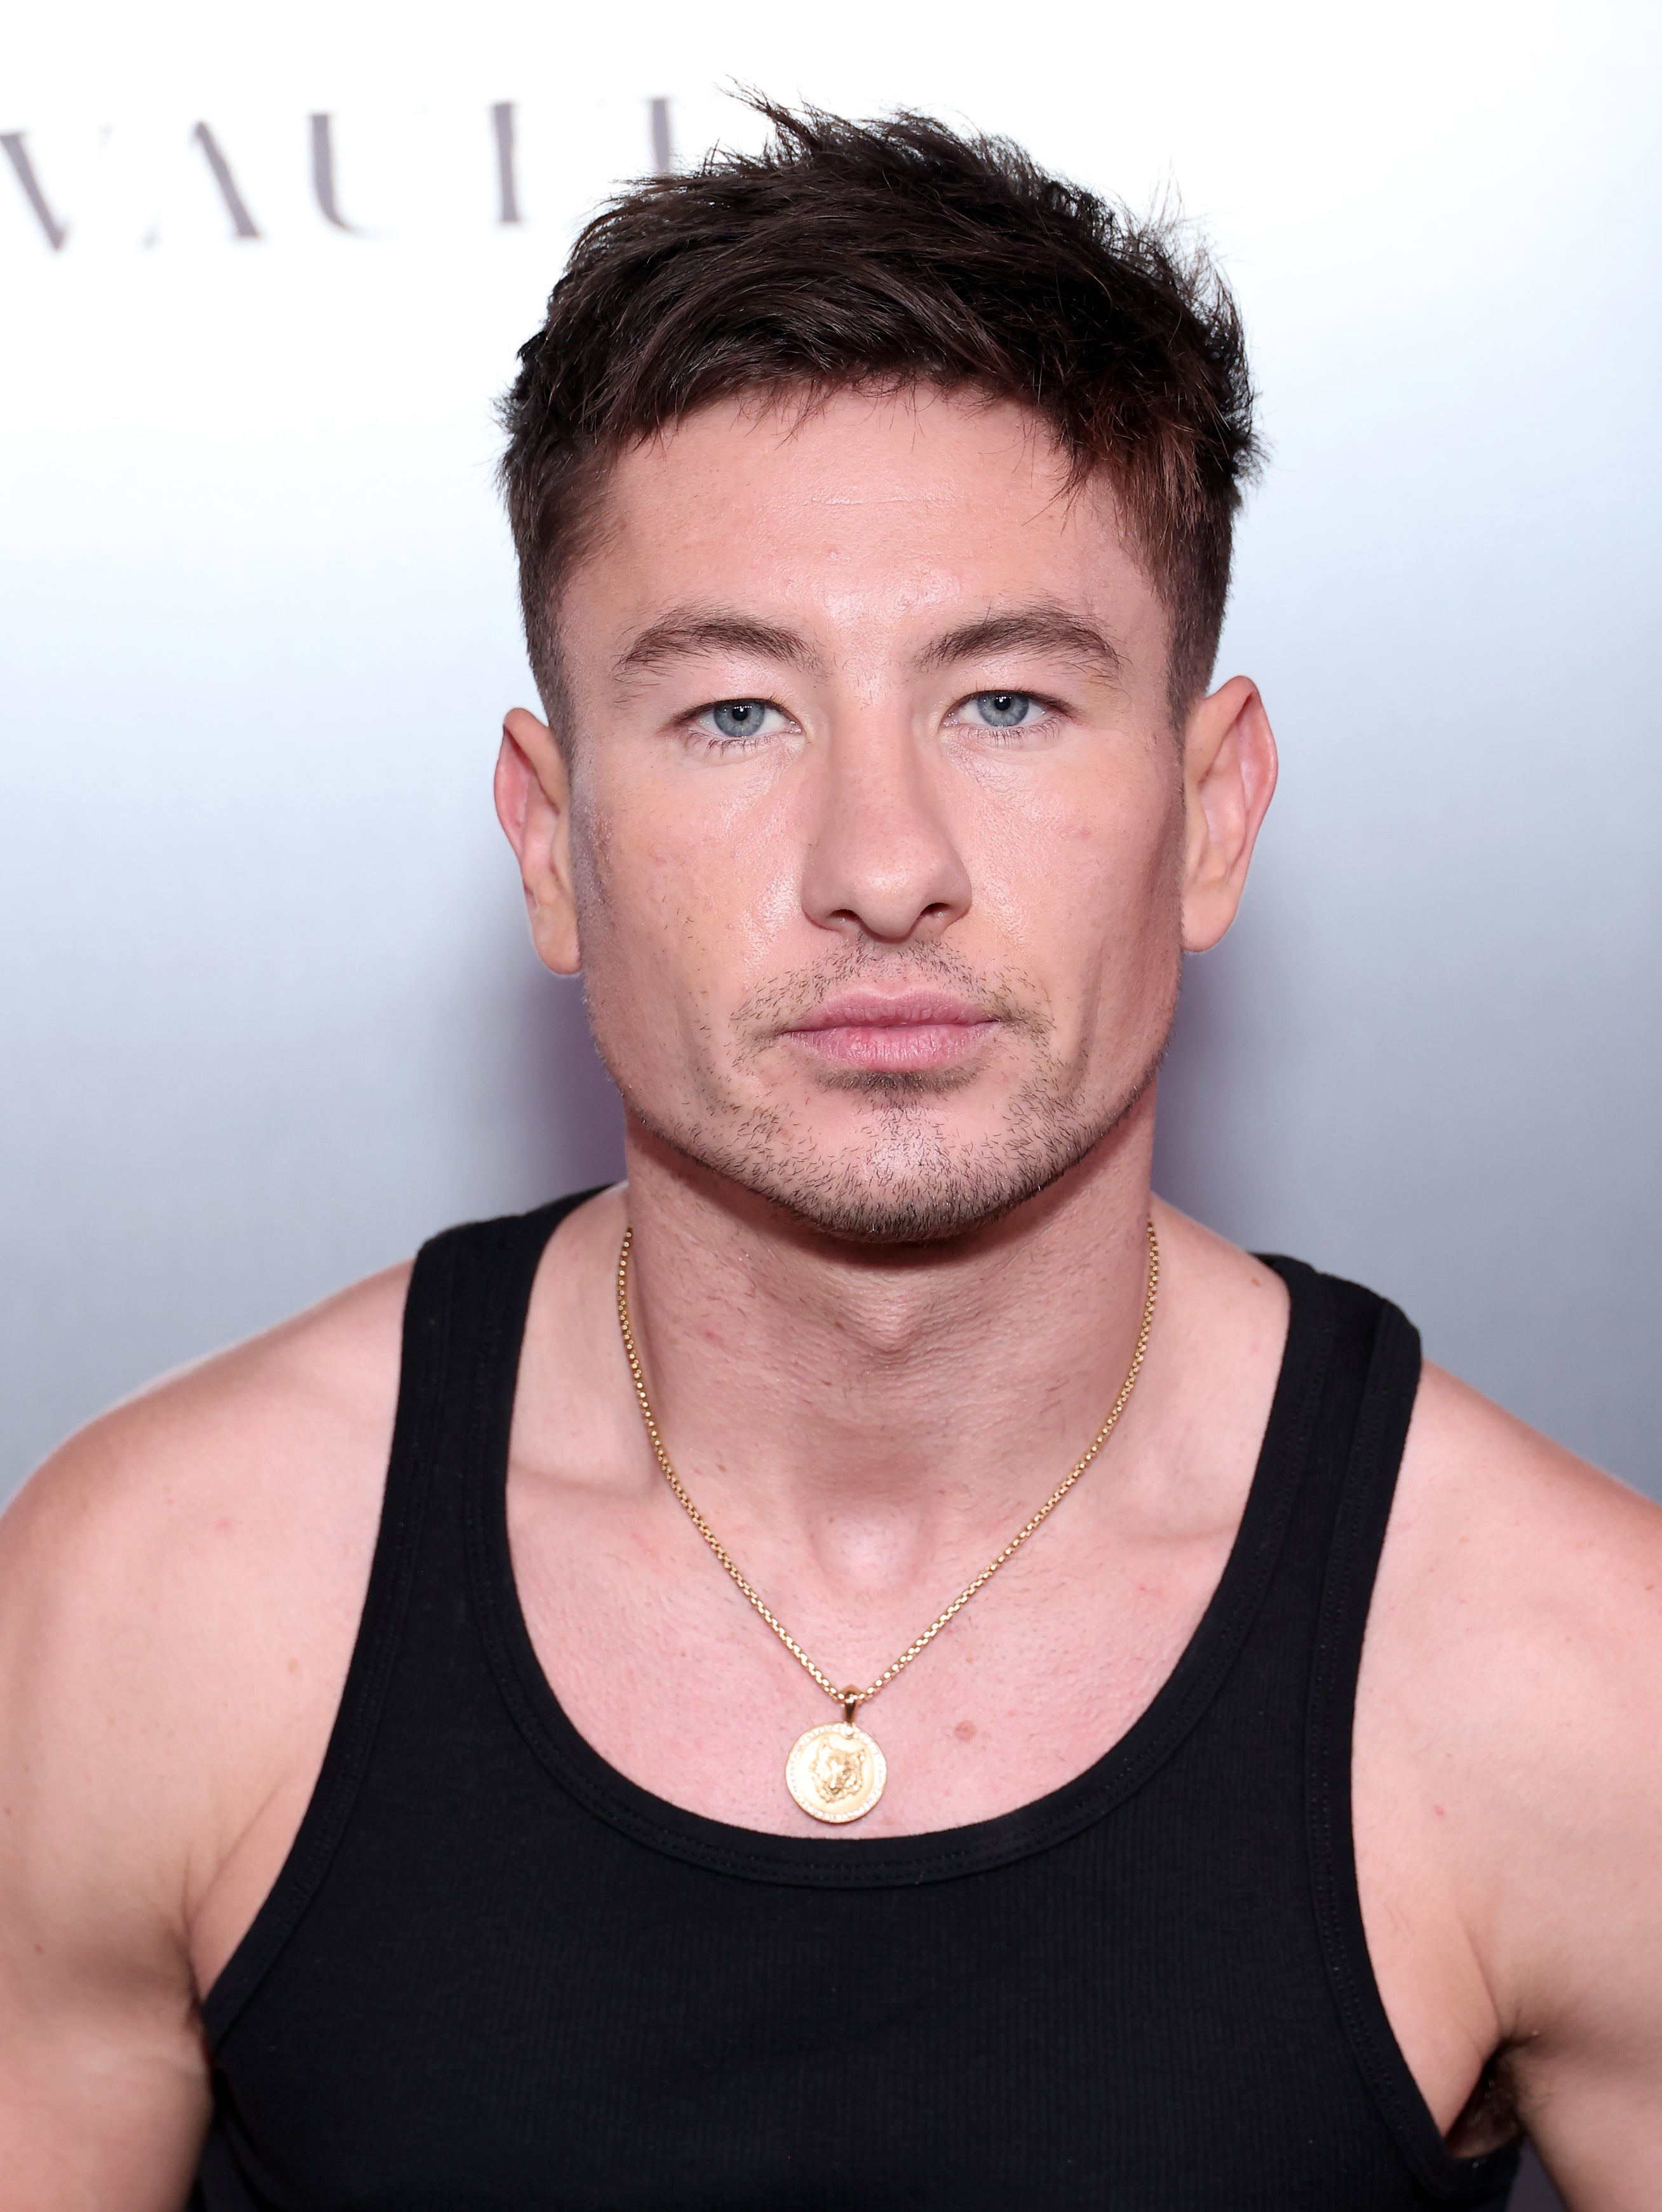 Barry Keoghan in a black sleeveless top with a gold necklace, posing in front of a promotional backdrop